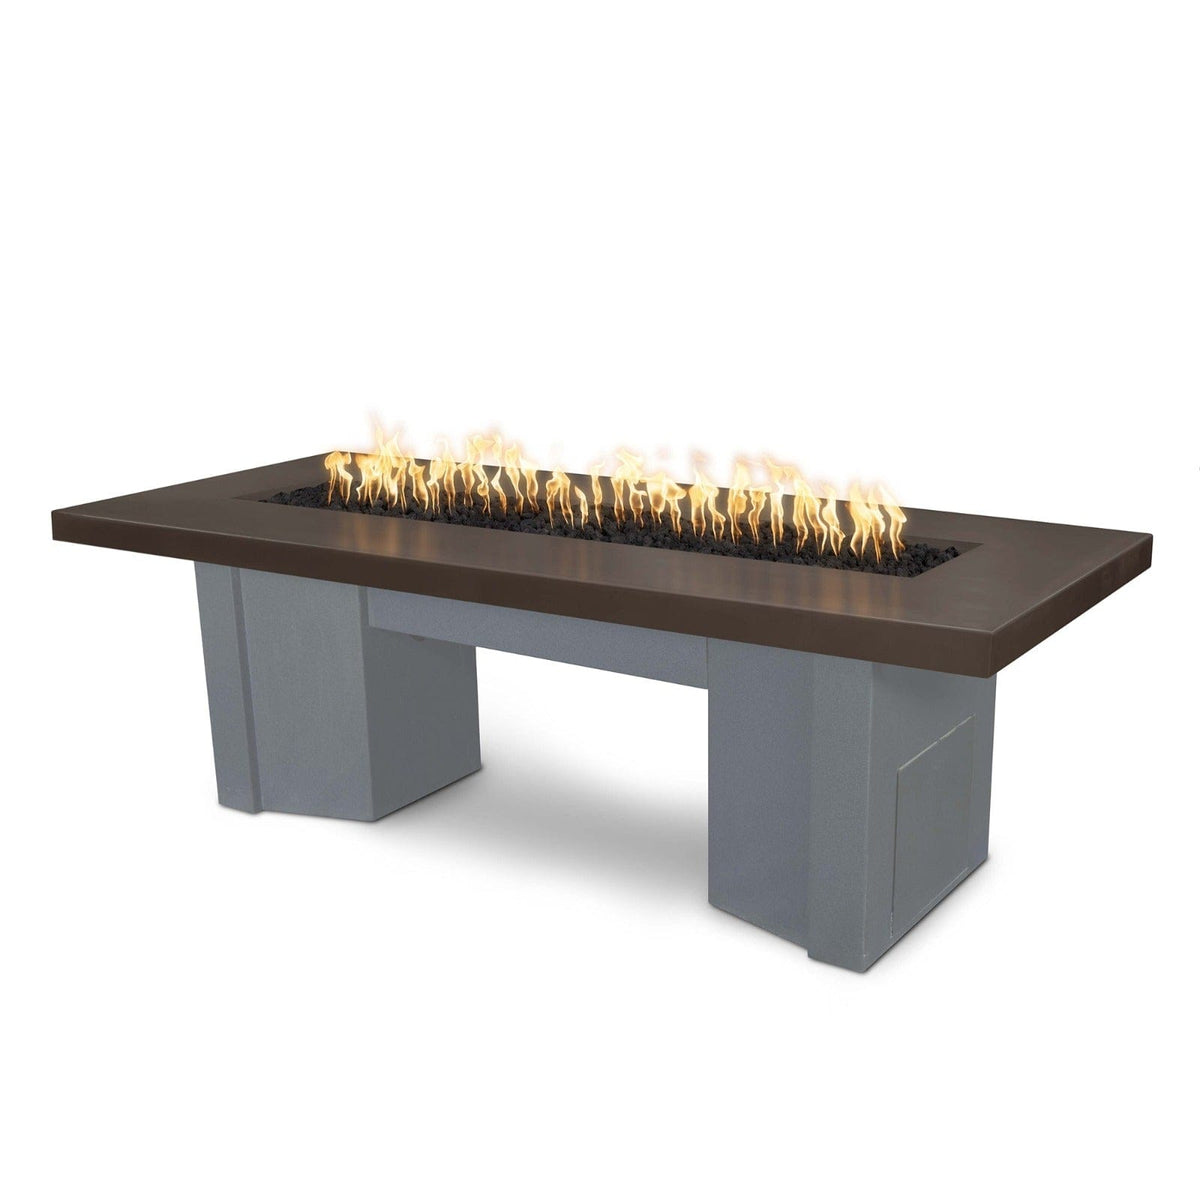 The Outdoor Plus Fire Features Chocolate (-CHC) / Gray Powder Coated Steel (-GRY) The Outdoor Plus 78&quot; Alameda Fire Table Smooth Concrete in Natural Gas - Flame Sense System with Push Button Spark Igniter / OPT-ALMGFRC78FSEN-NG